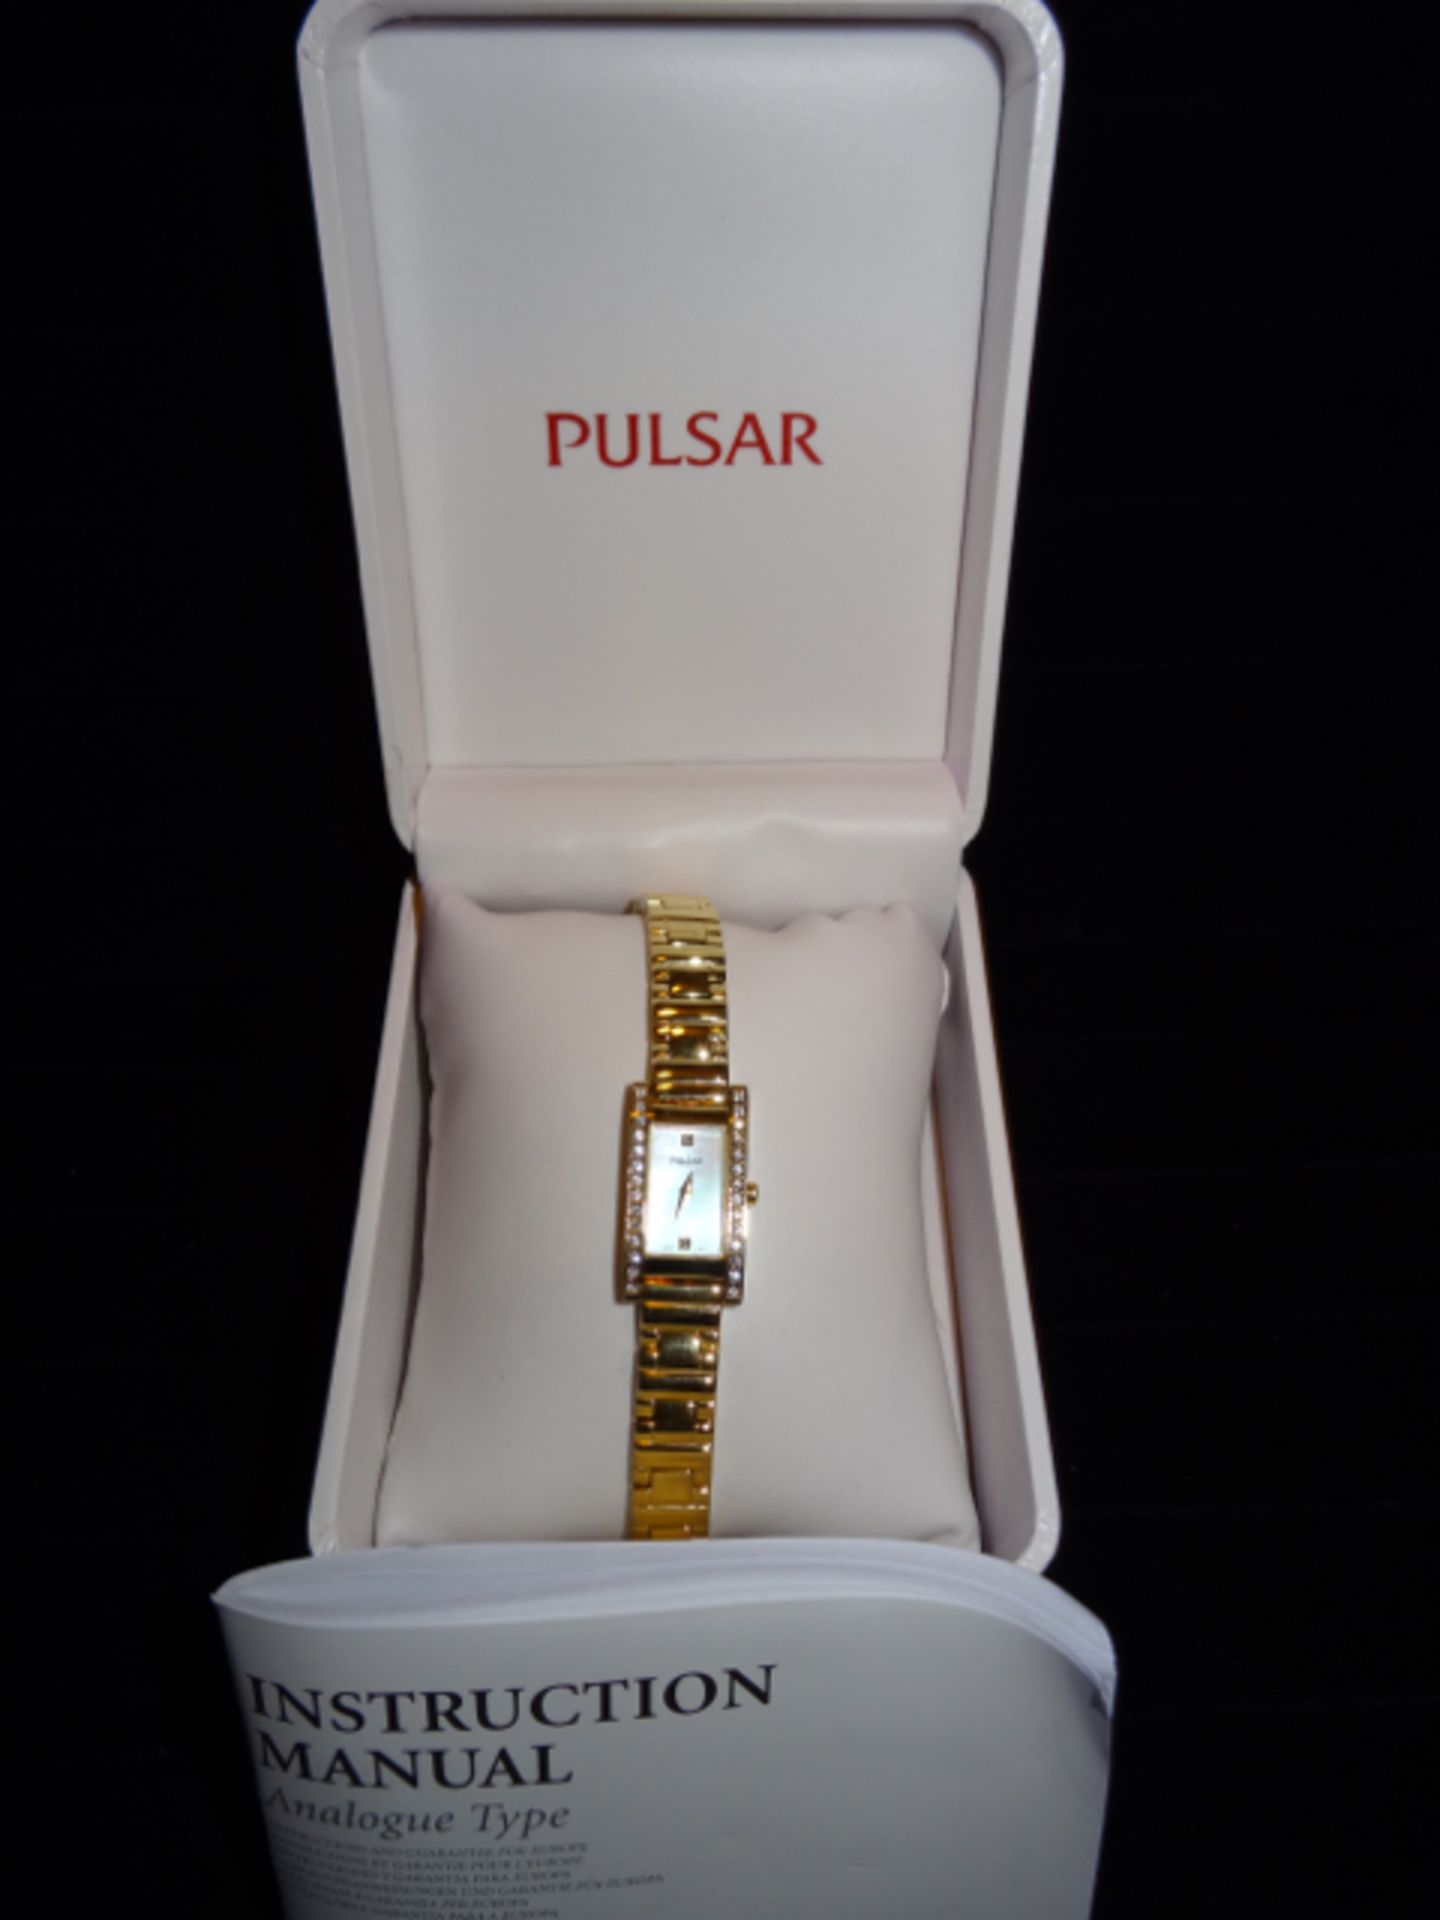 1 x Pulsar PEGD28X1 Watch, New complete with box and all accessories. *FINAL PRICE TO INCLUDE FREE